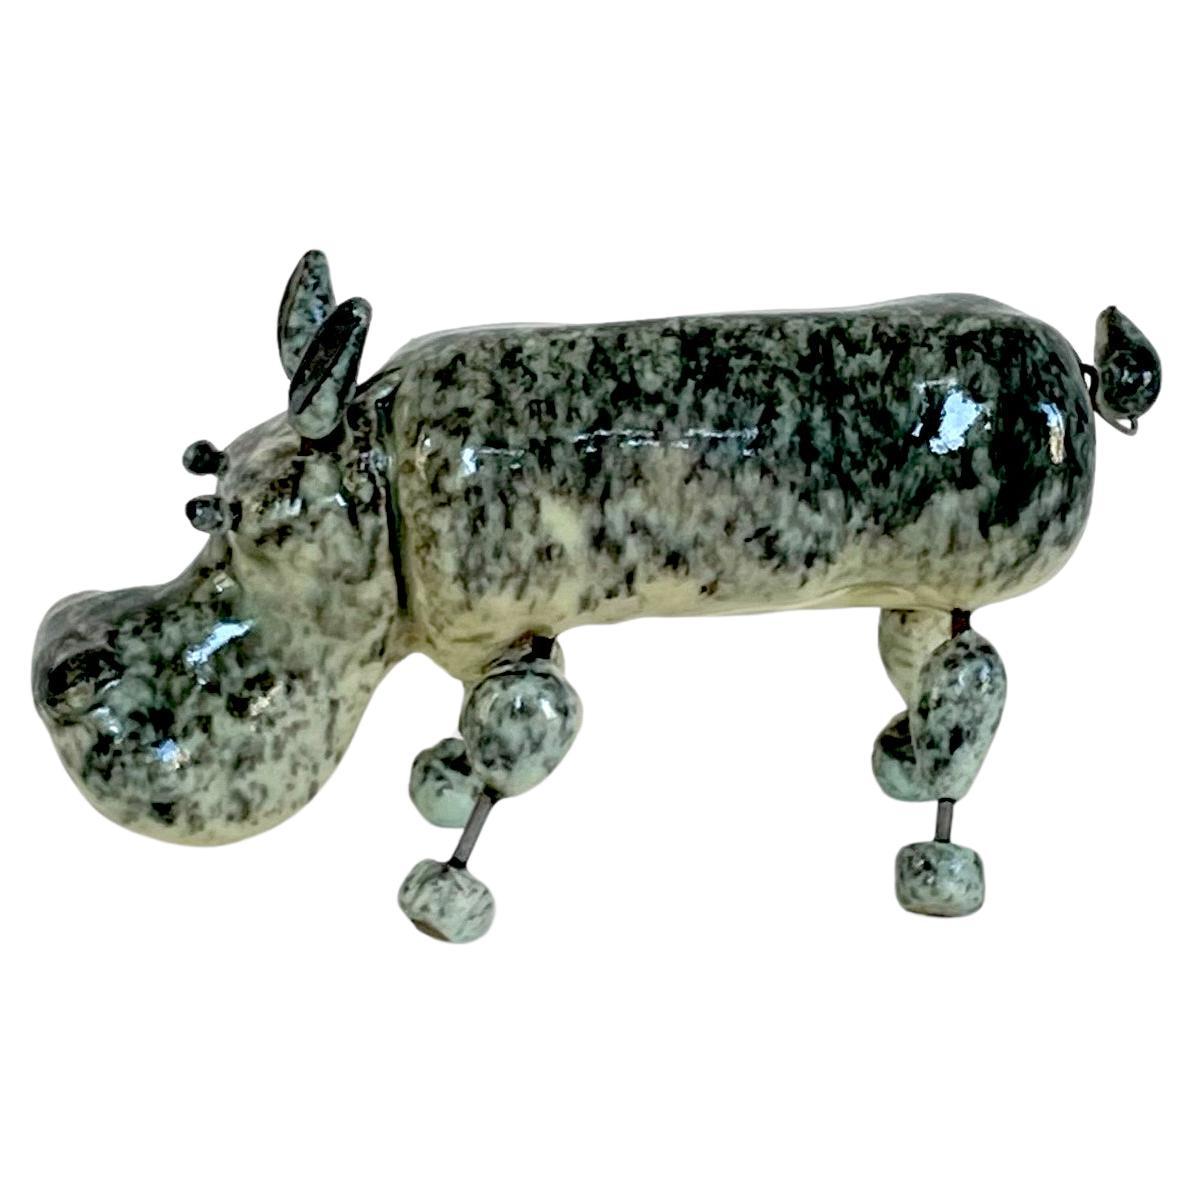 Ceramic figurine from Accolay, France, 1960